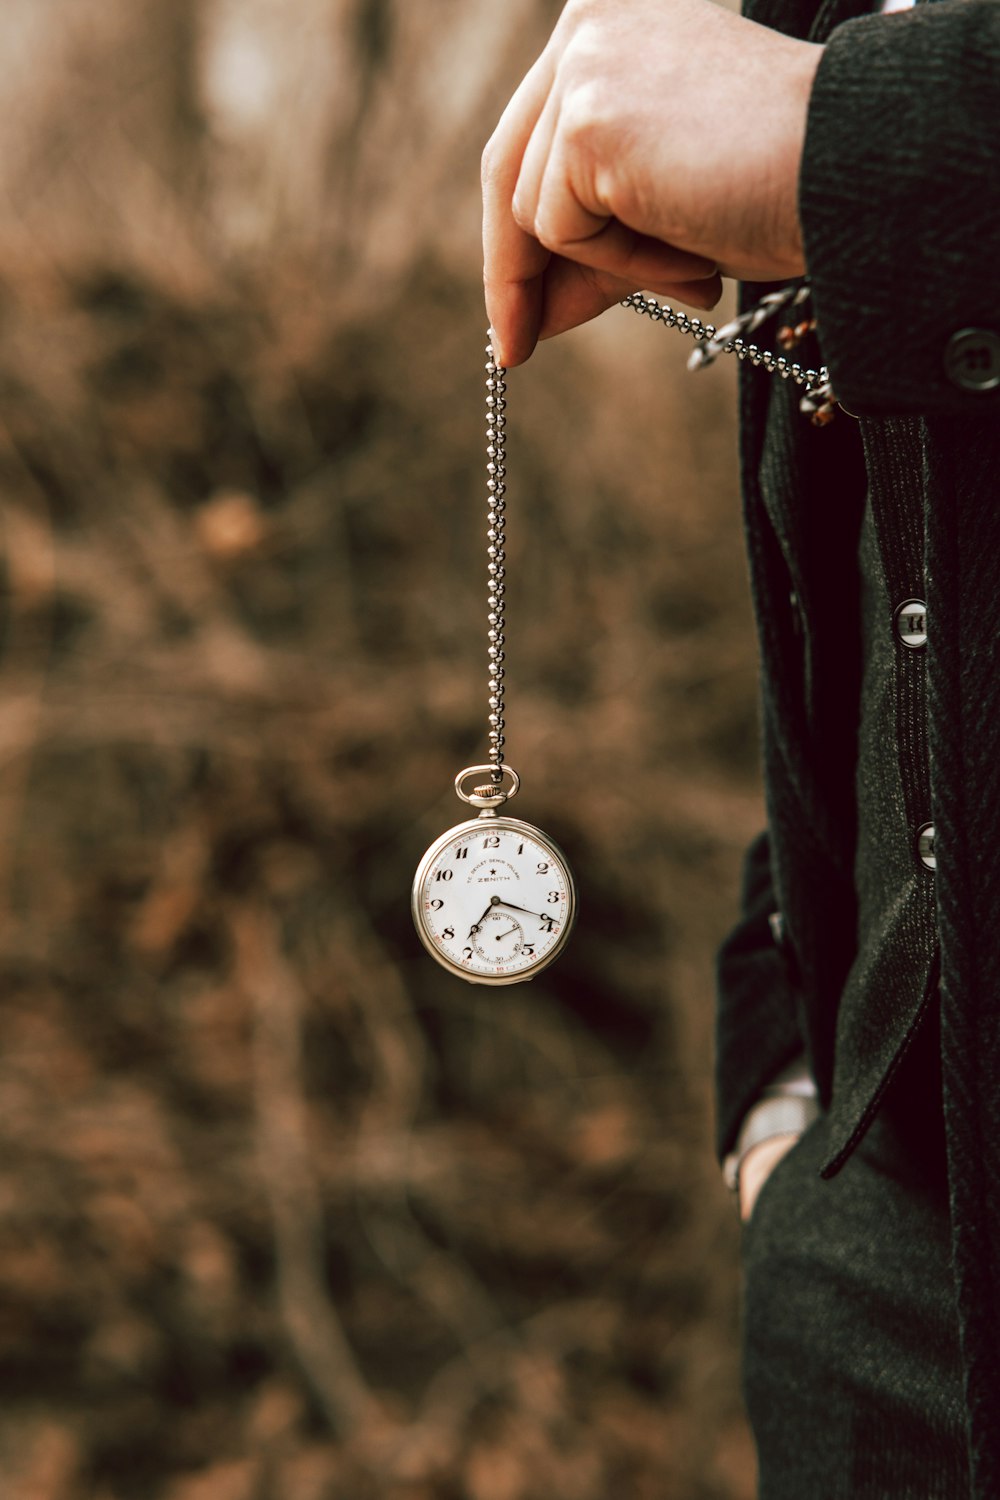 a person holding a pocket watch in their hand